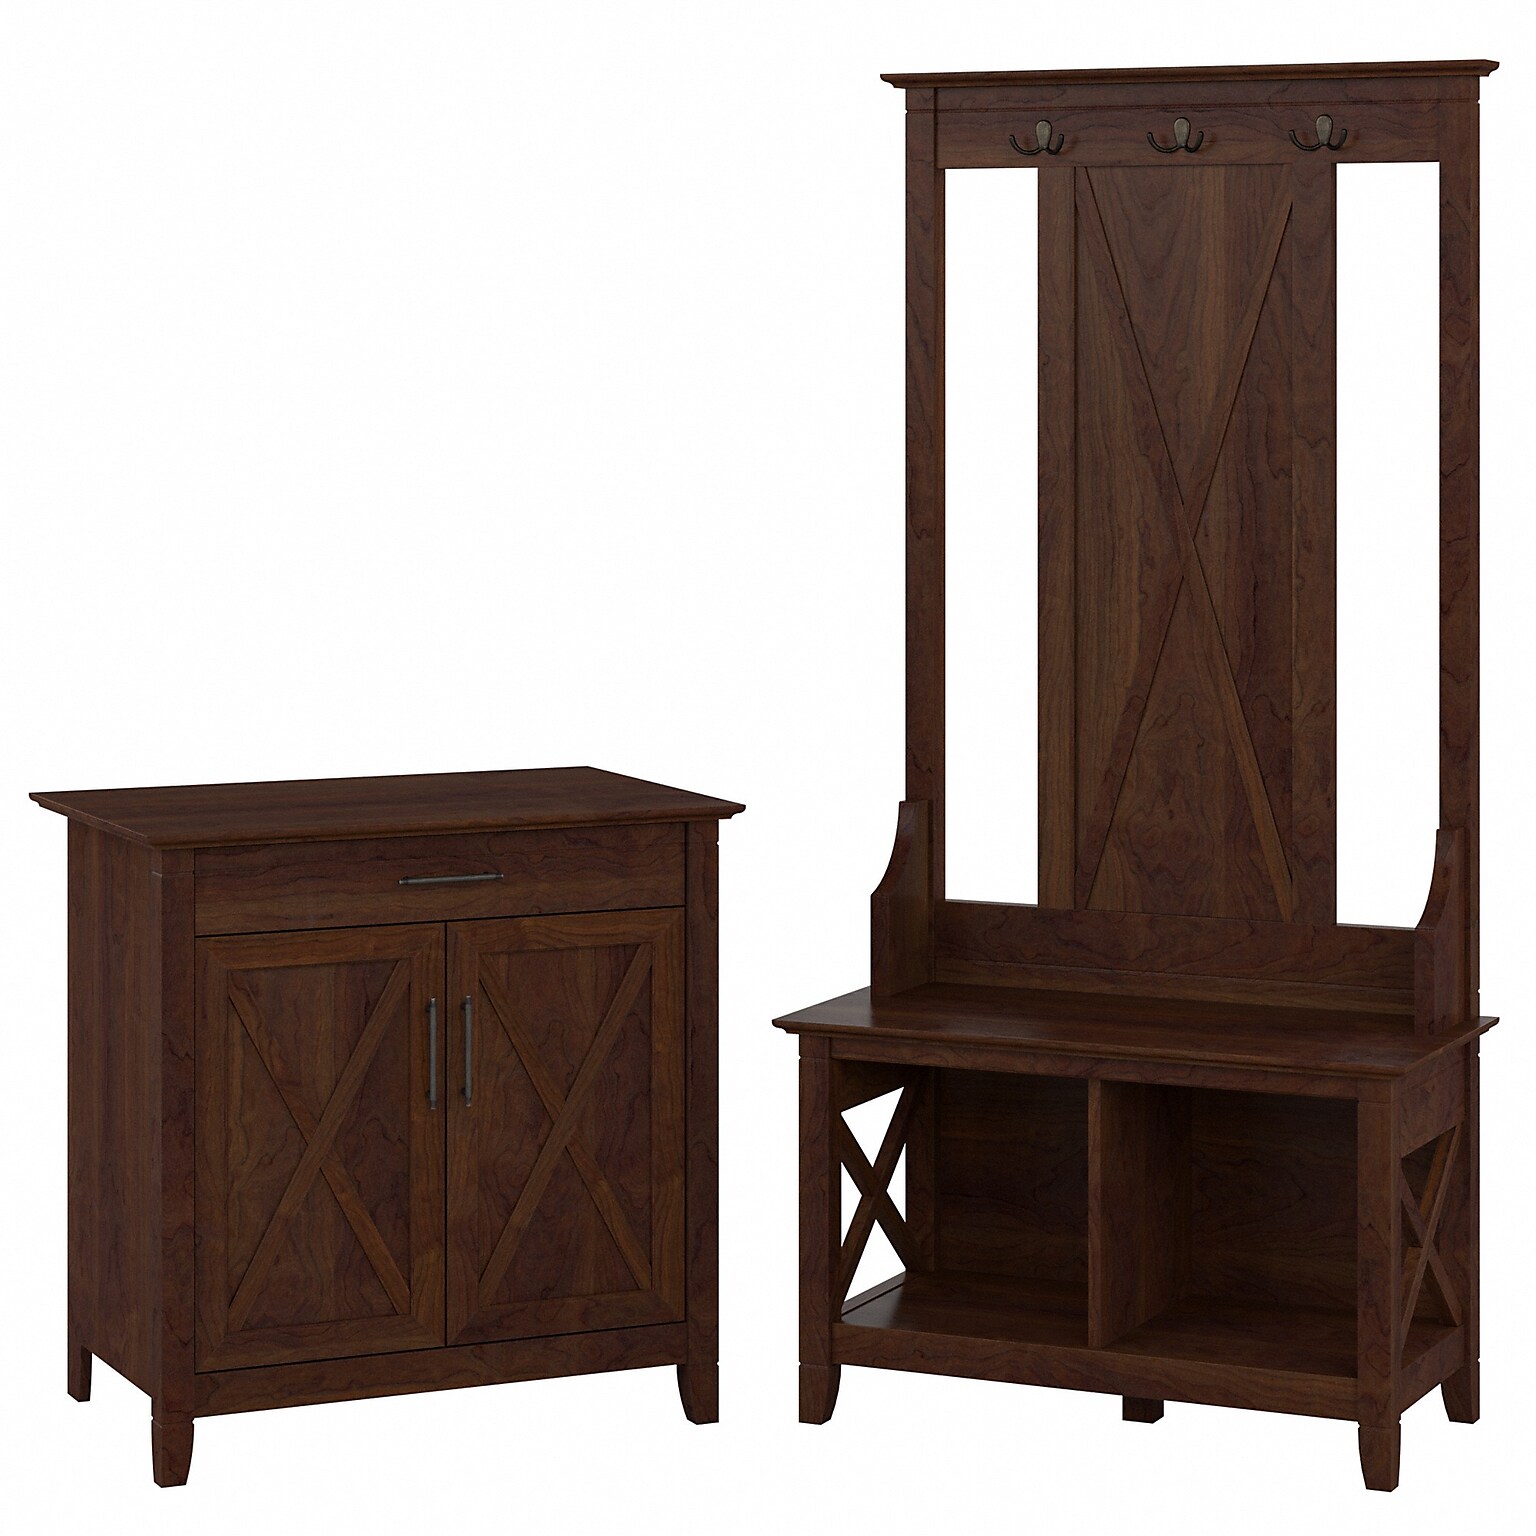 Bush Furniture Key West 66 Entryway Storage Set with Hall Tree, Shoe Bench, and Armoire Cabinet, Bing Cherry (KWS055BC)